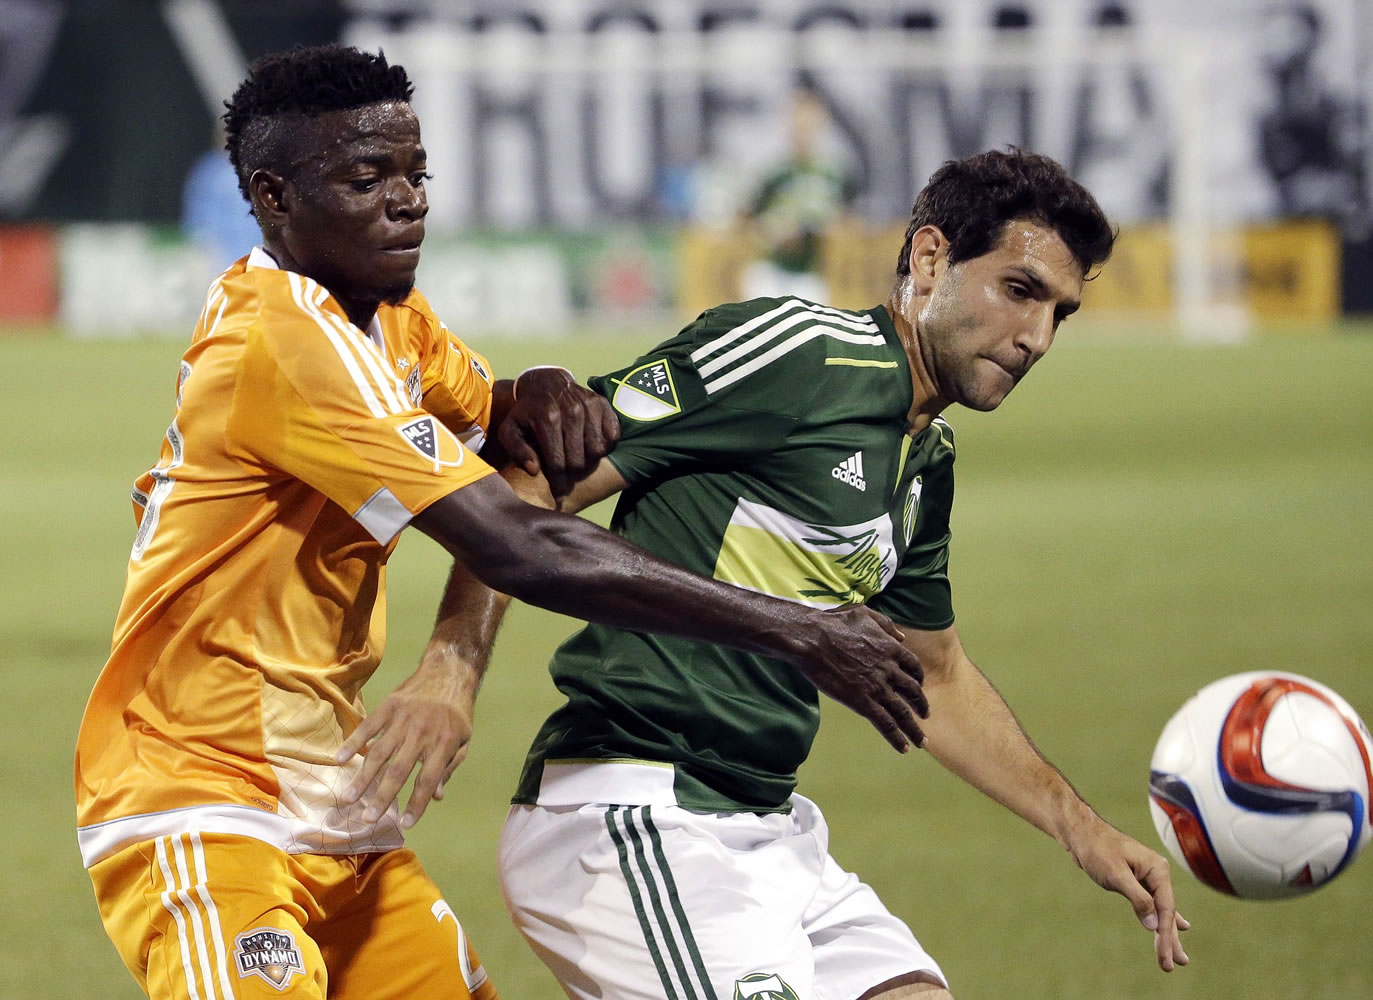 Portland Timbers midfielder Diego Valeri, right, battles Houston Dynamo midfielder Rasheed Olabiyi for possession during the first half of Friday's game at Providence Park.